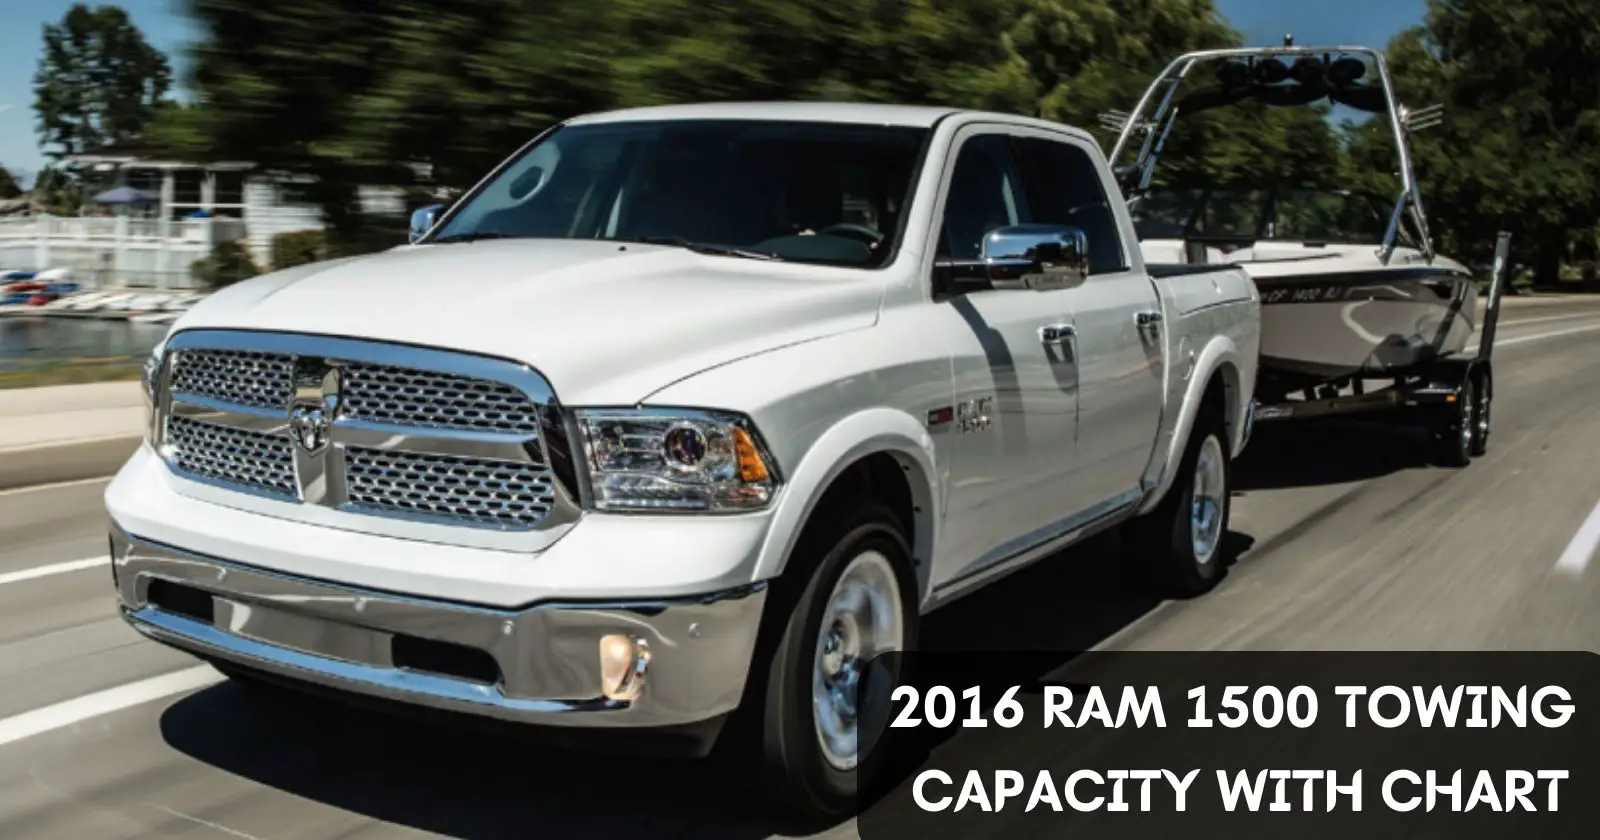 2016-ram-1500-towing-capacity-with-chart-thecartowing